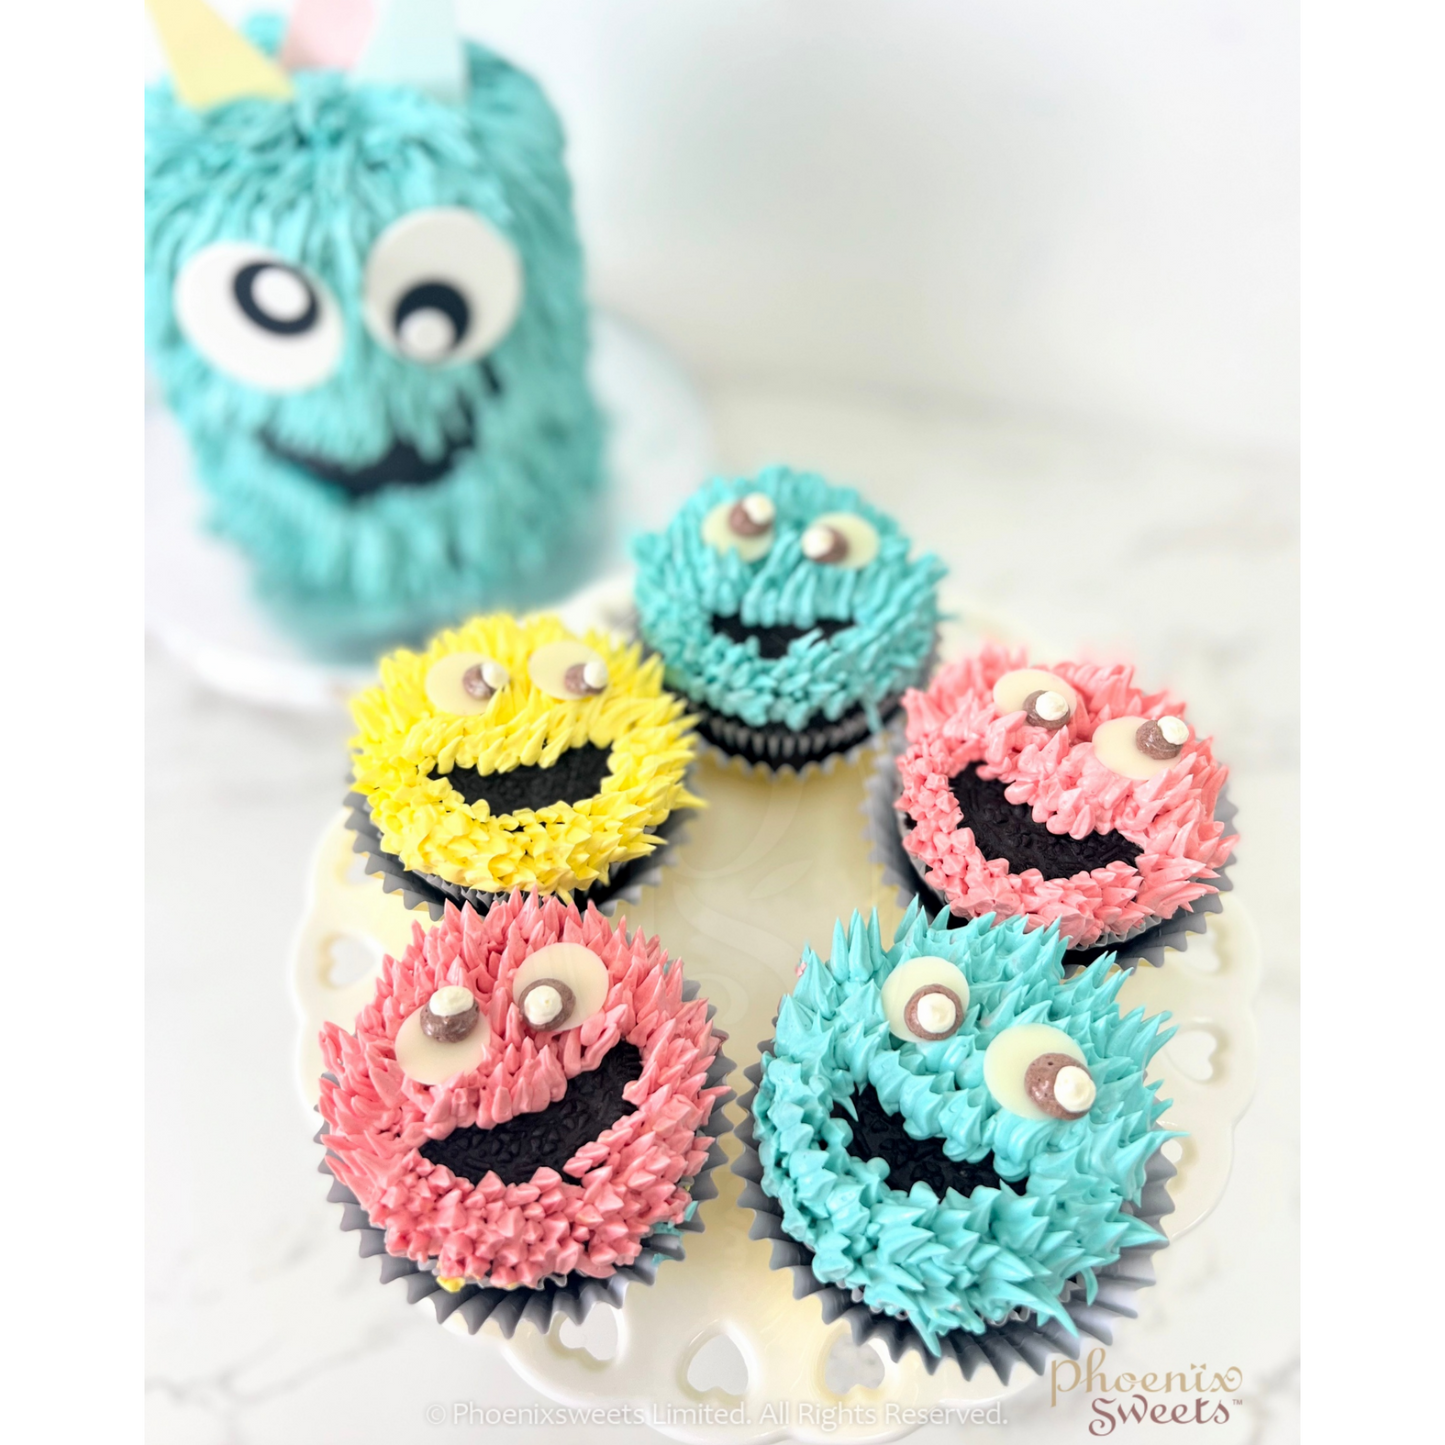 Themed Party Combo - Happy Monster Cake and Cupcake Tower